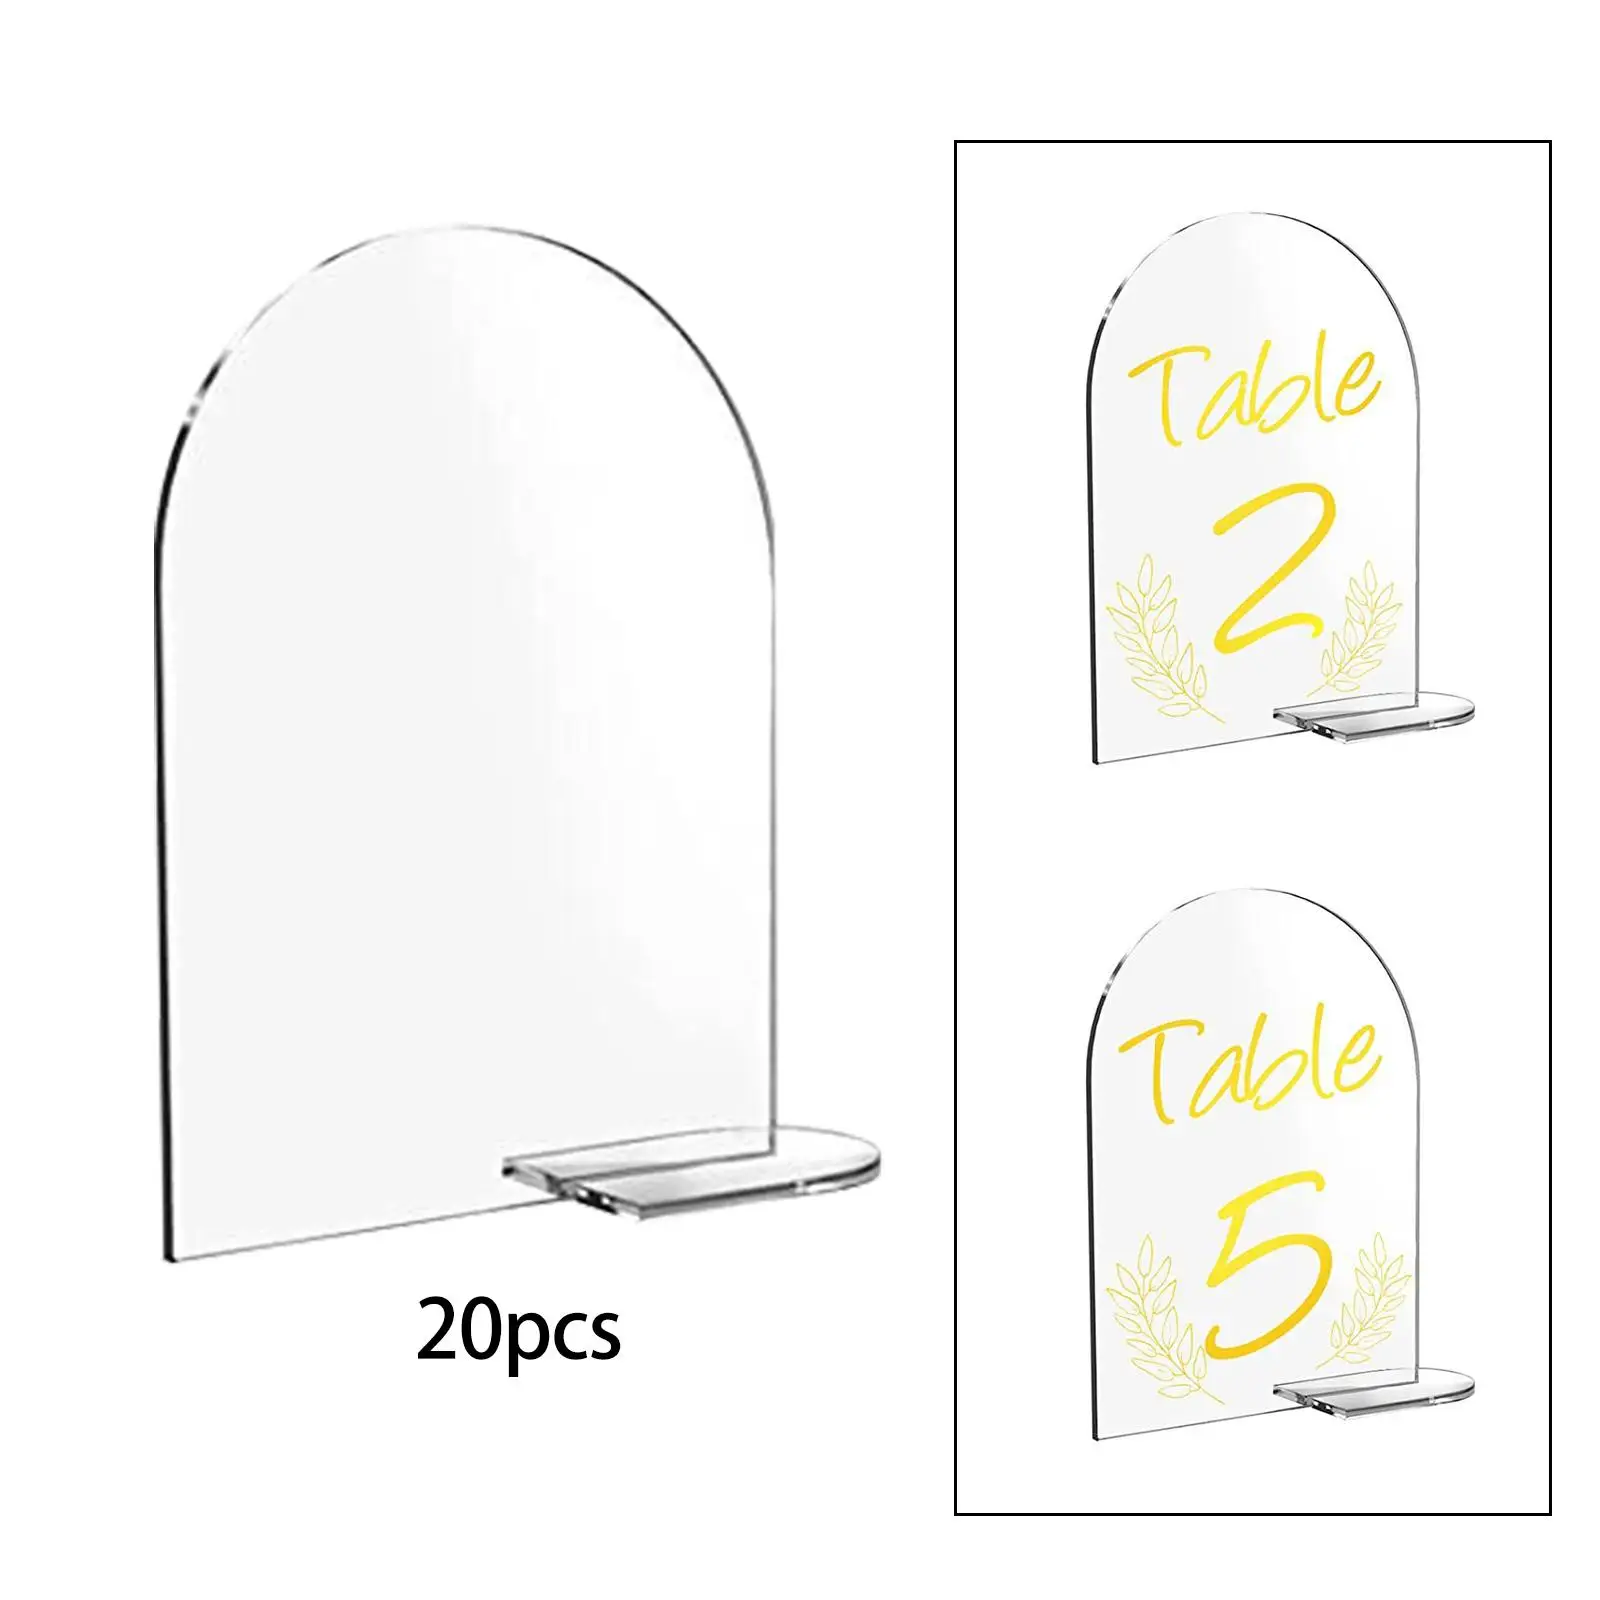 4x6 inch Blank Acrylic Signs Holder Stand Centerpieces List Sign DIY Place Cards for Wedding Reception Exhibition Events Banquet